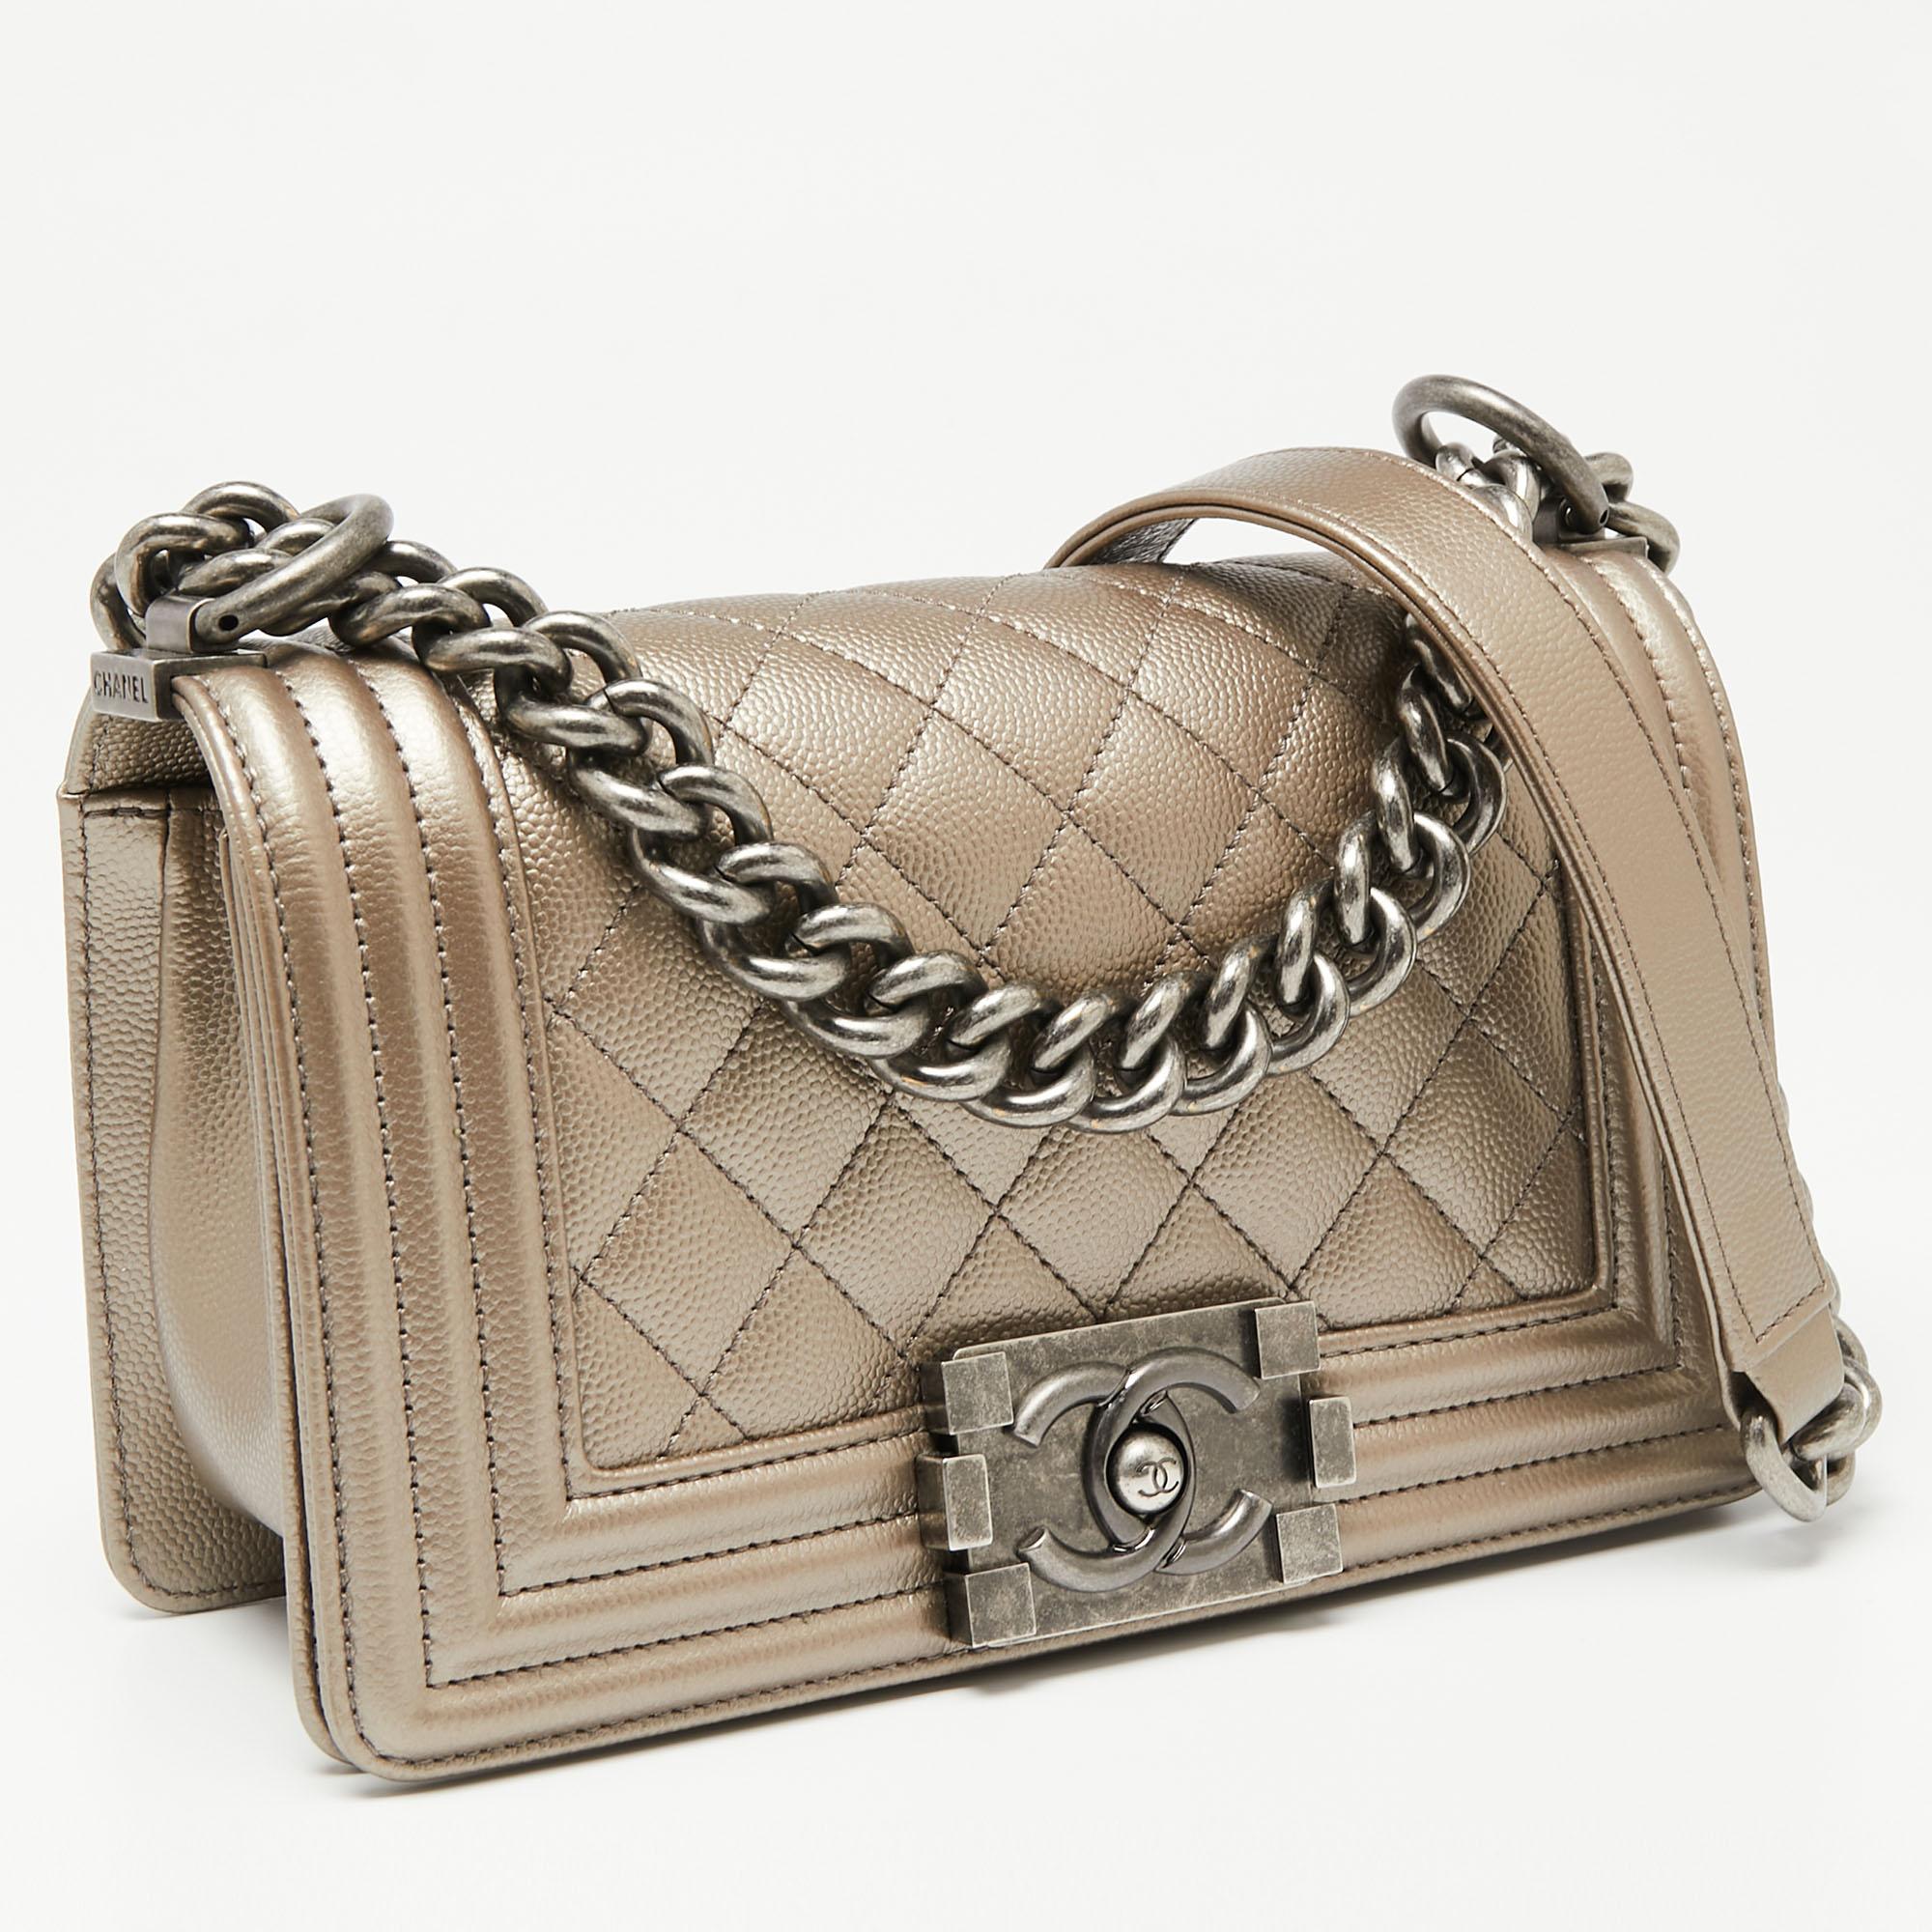 Eyed by women worldwide, Chanel's luxurious Boy Flap bag is a must-have in your closet! The stunning bag is made from Caviar leather and has the diamond quilt. It features dark ruthenium-tone hardware, the iconic CC logo on the front, and a sturdy